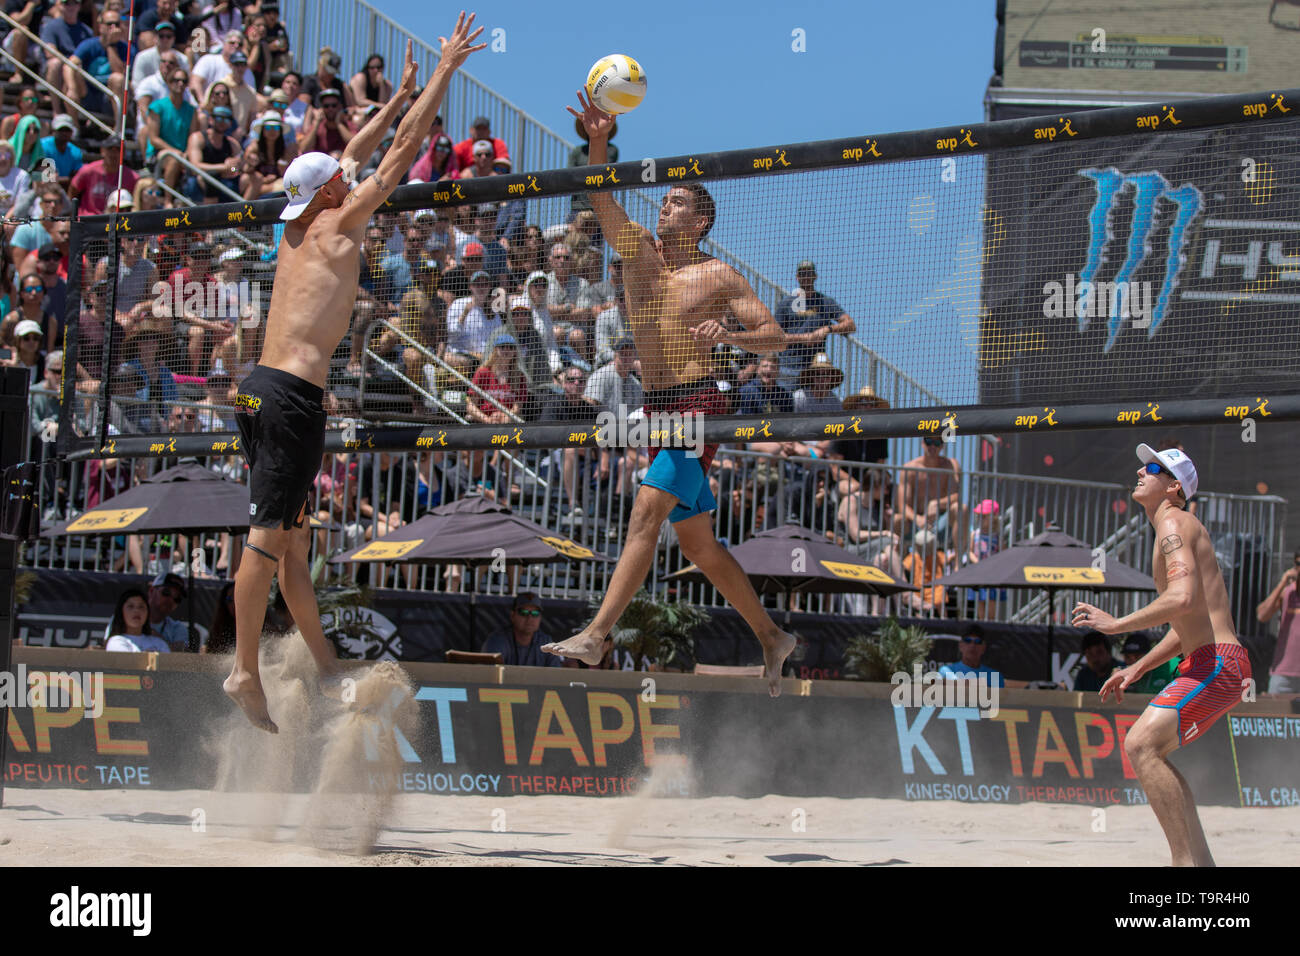 Trevor Crabb hits a cut shot during semifinal action at the AVP Huntington Beach Open on 5 May 2019. (J. Geldermann/Alamy Live News) Stock Photo